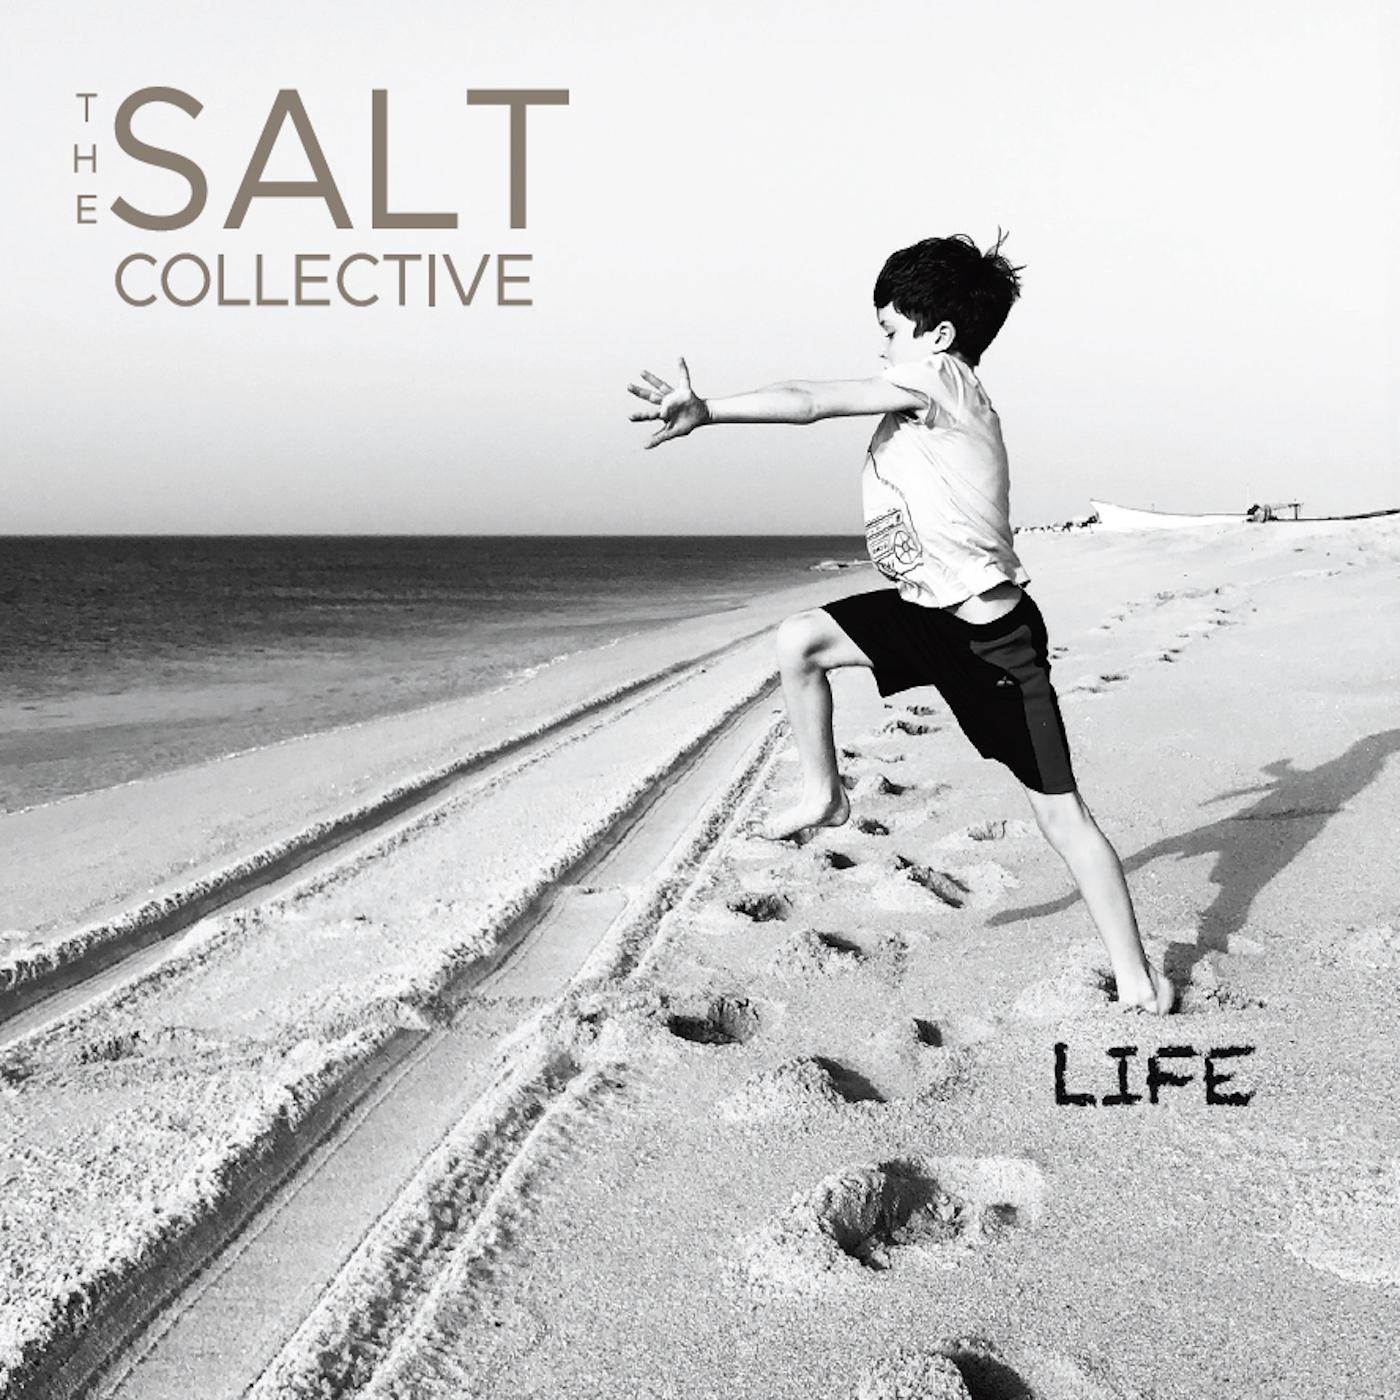 Life by The Salt Collective